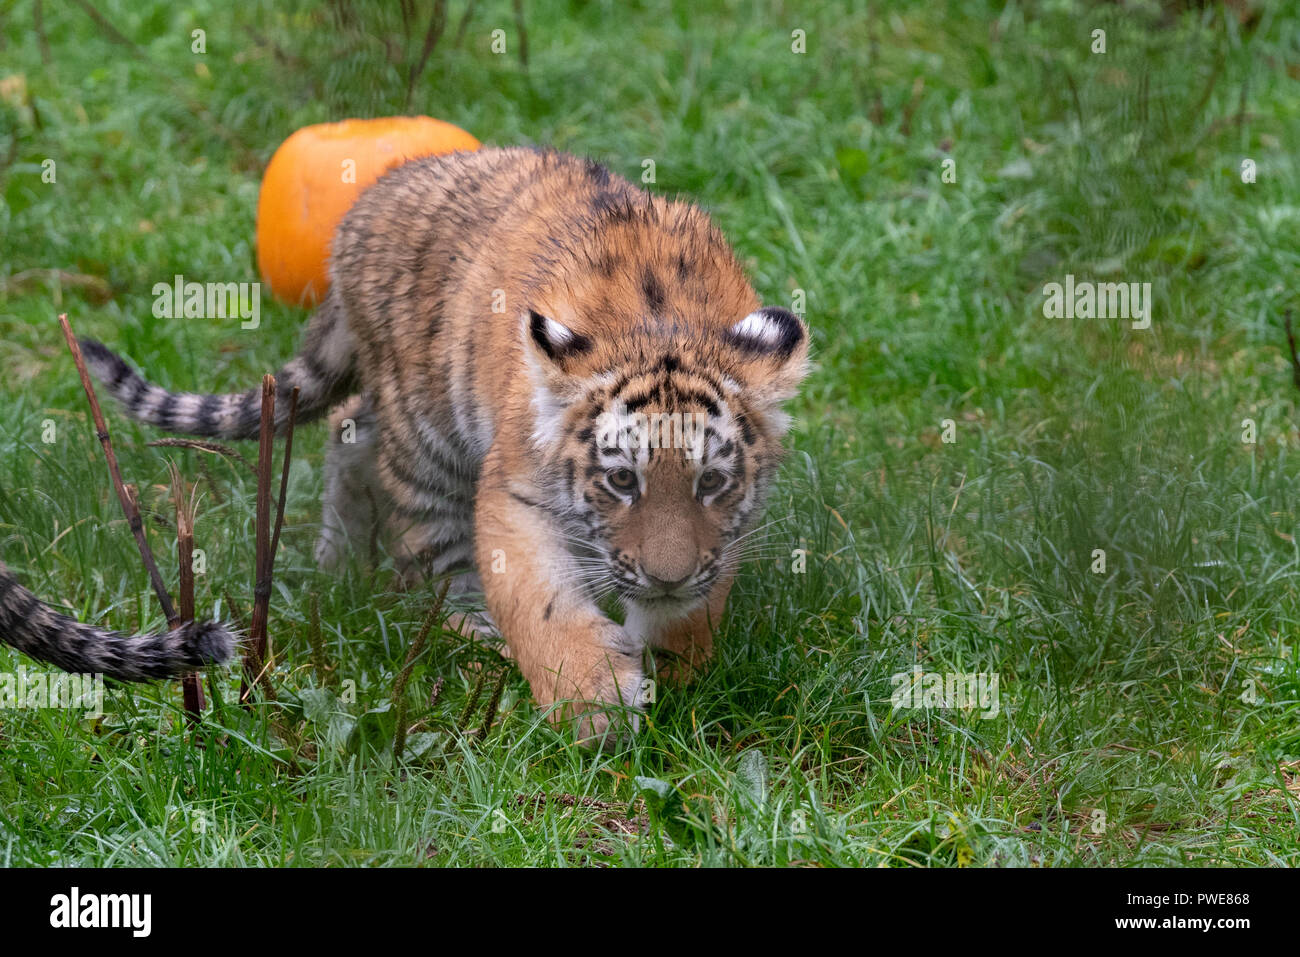 Whipsnade, United Kingdom. 16 October 2018. Keepers at ZSL Whipsnade Zoo carved huge pumpkins for each of the Zoo’s three endangered Amur tiger cubs, Dmitri, Makari and Czar. The Zoo’s spirited group of ring-tailed lemurs, so named after the ghosts of Roman mythology (lemures), also got in on the action. Keepers prepared a series of small pumpkins, filled with raisins and other tasty treats. Credit: Peter Manning/Alamy Live News Stock Photo